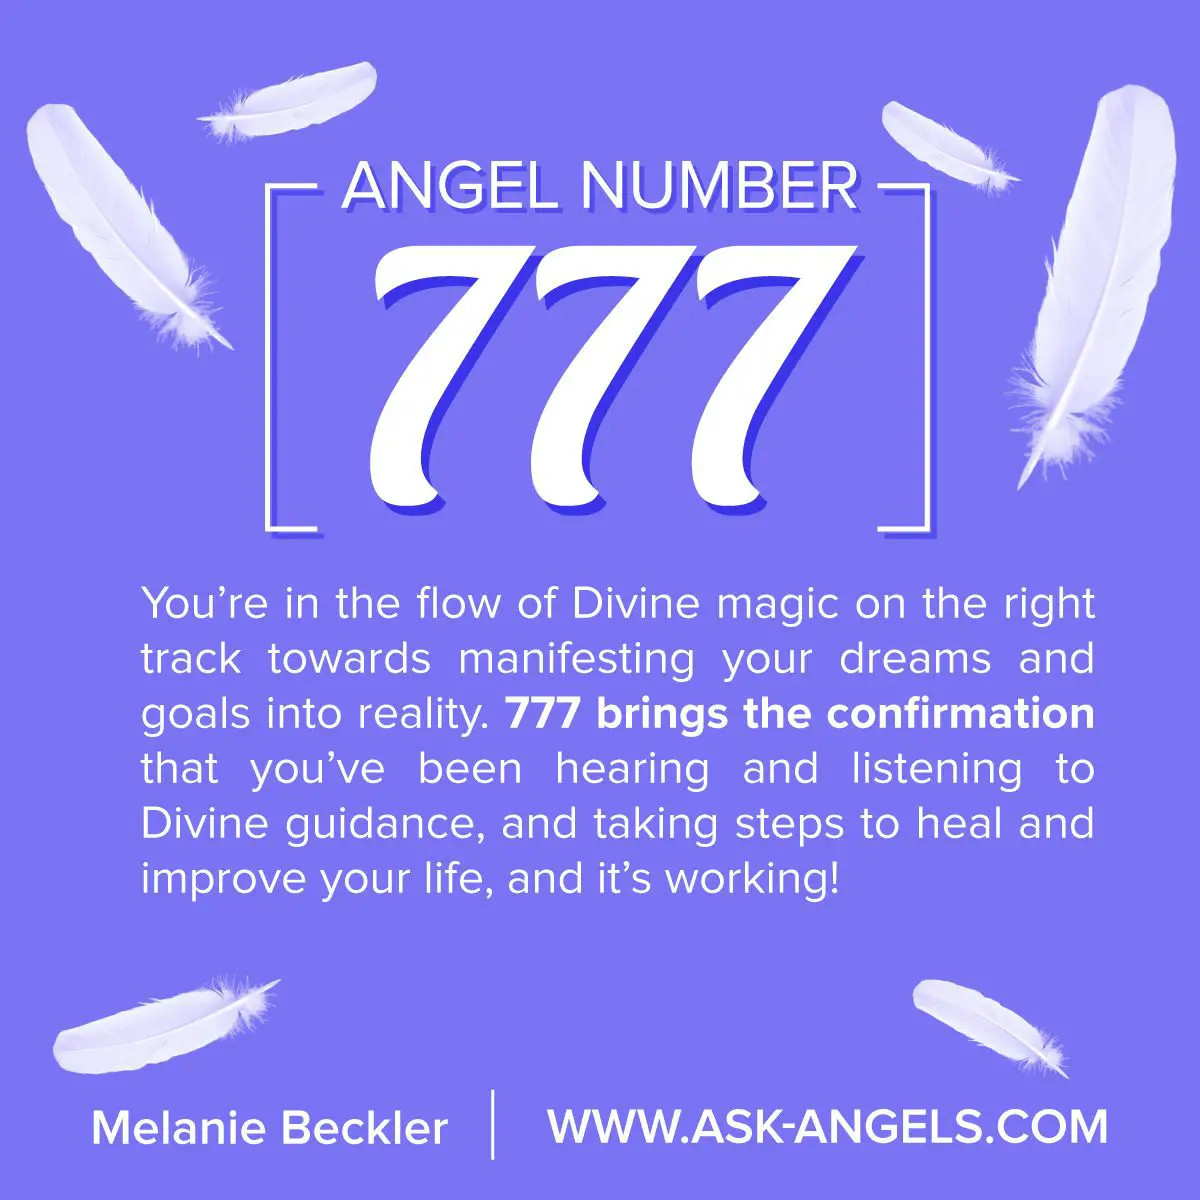 What Does 777 Mean In Angel Numbers?